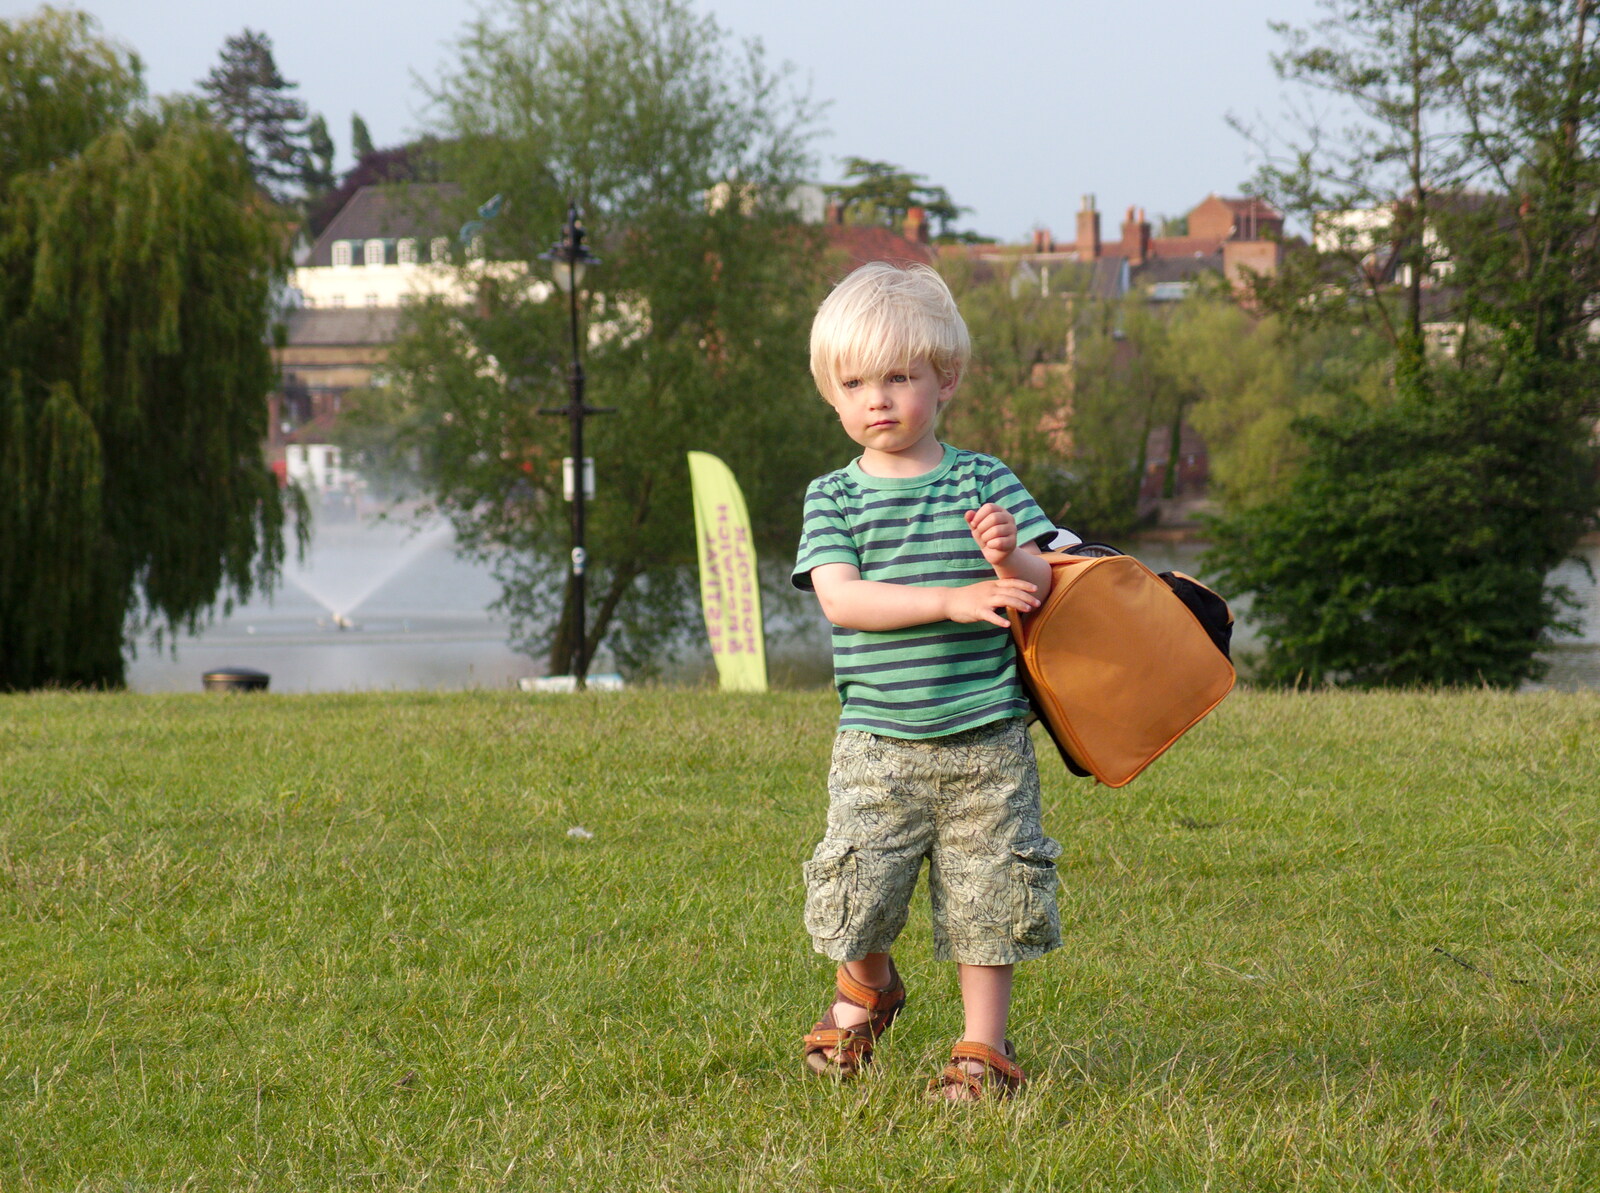 Harry carries a bag around from A Family Fun Day on the Park, Diss, Norfolk - 16th May 2014